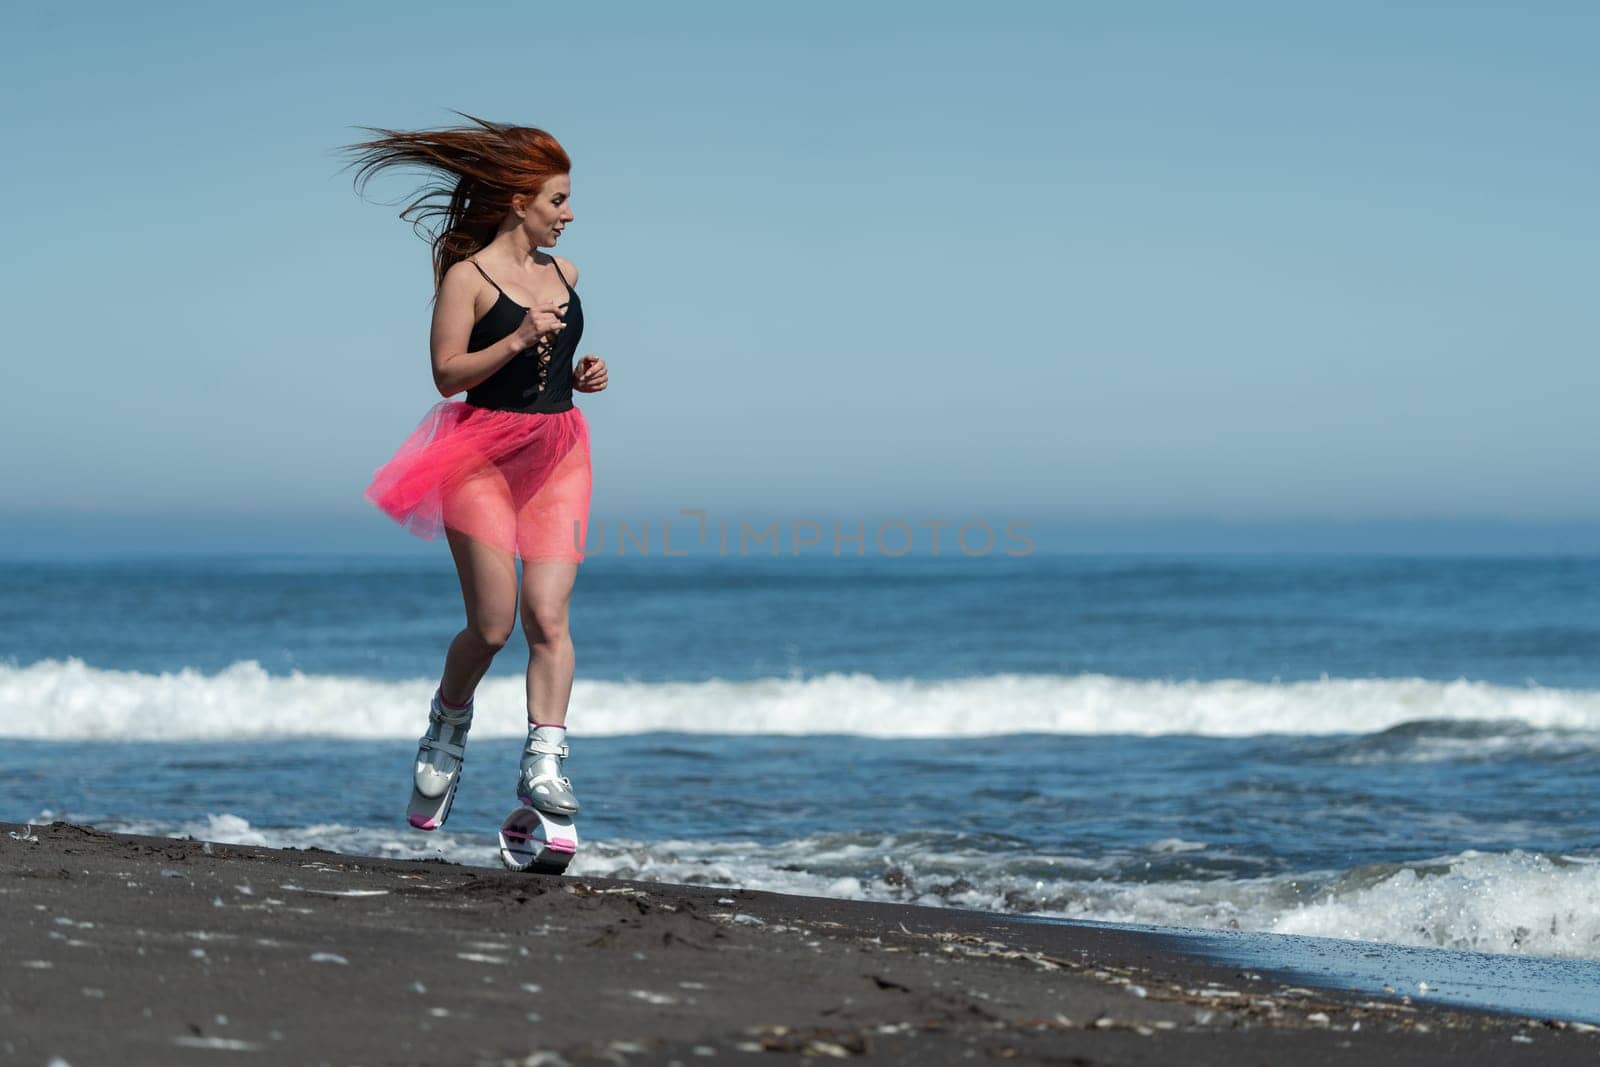 KAMCHATKA, RUSSIA - JUNE 15, 2022: Athletic woman in sports Kangoo Jumps boots, black one piece swimsuit, short skirt running and jumping on sandy beach during fitness and aerobic exercising outdoors